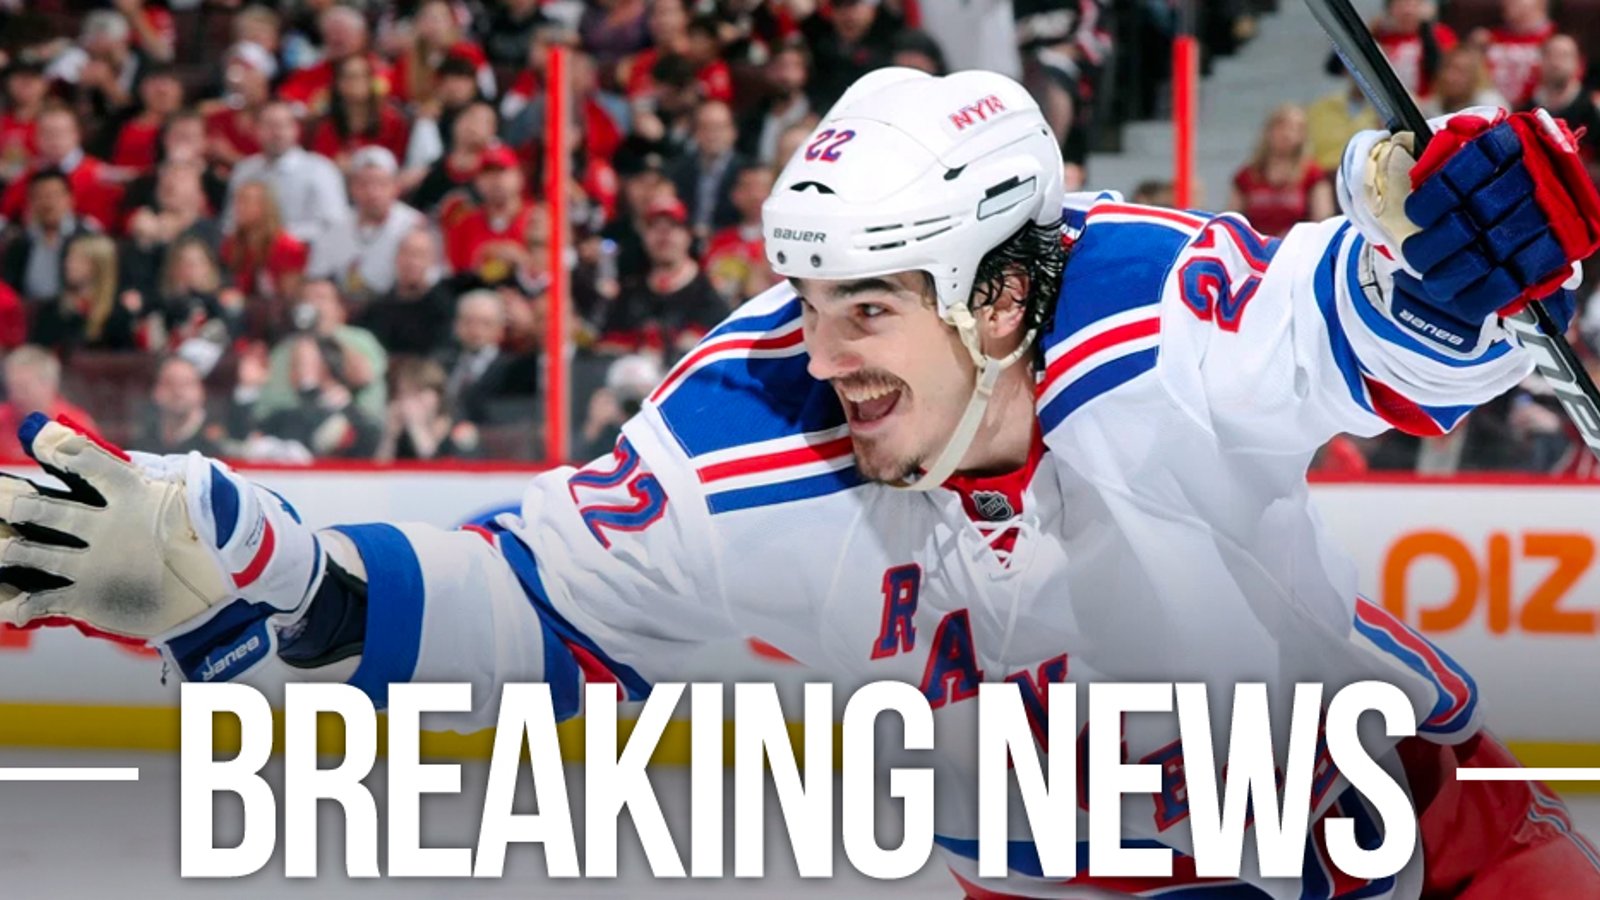 Report: Multiple teams talking to free agent Brian Boyle, including Rangers